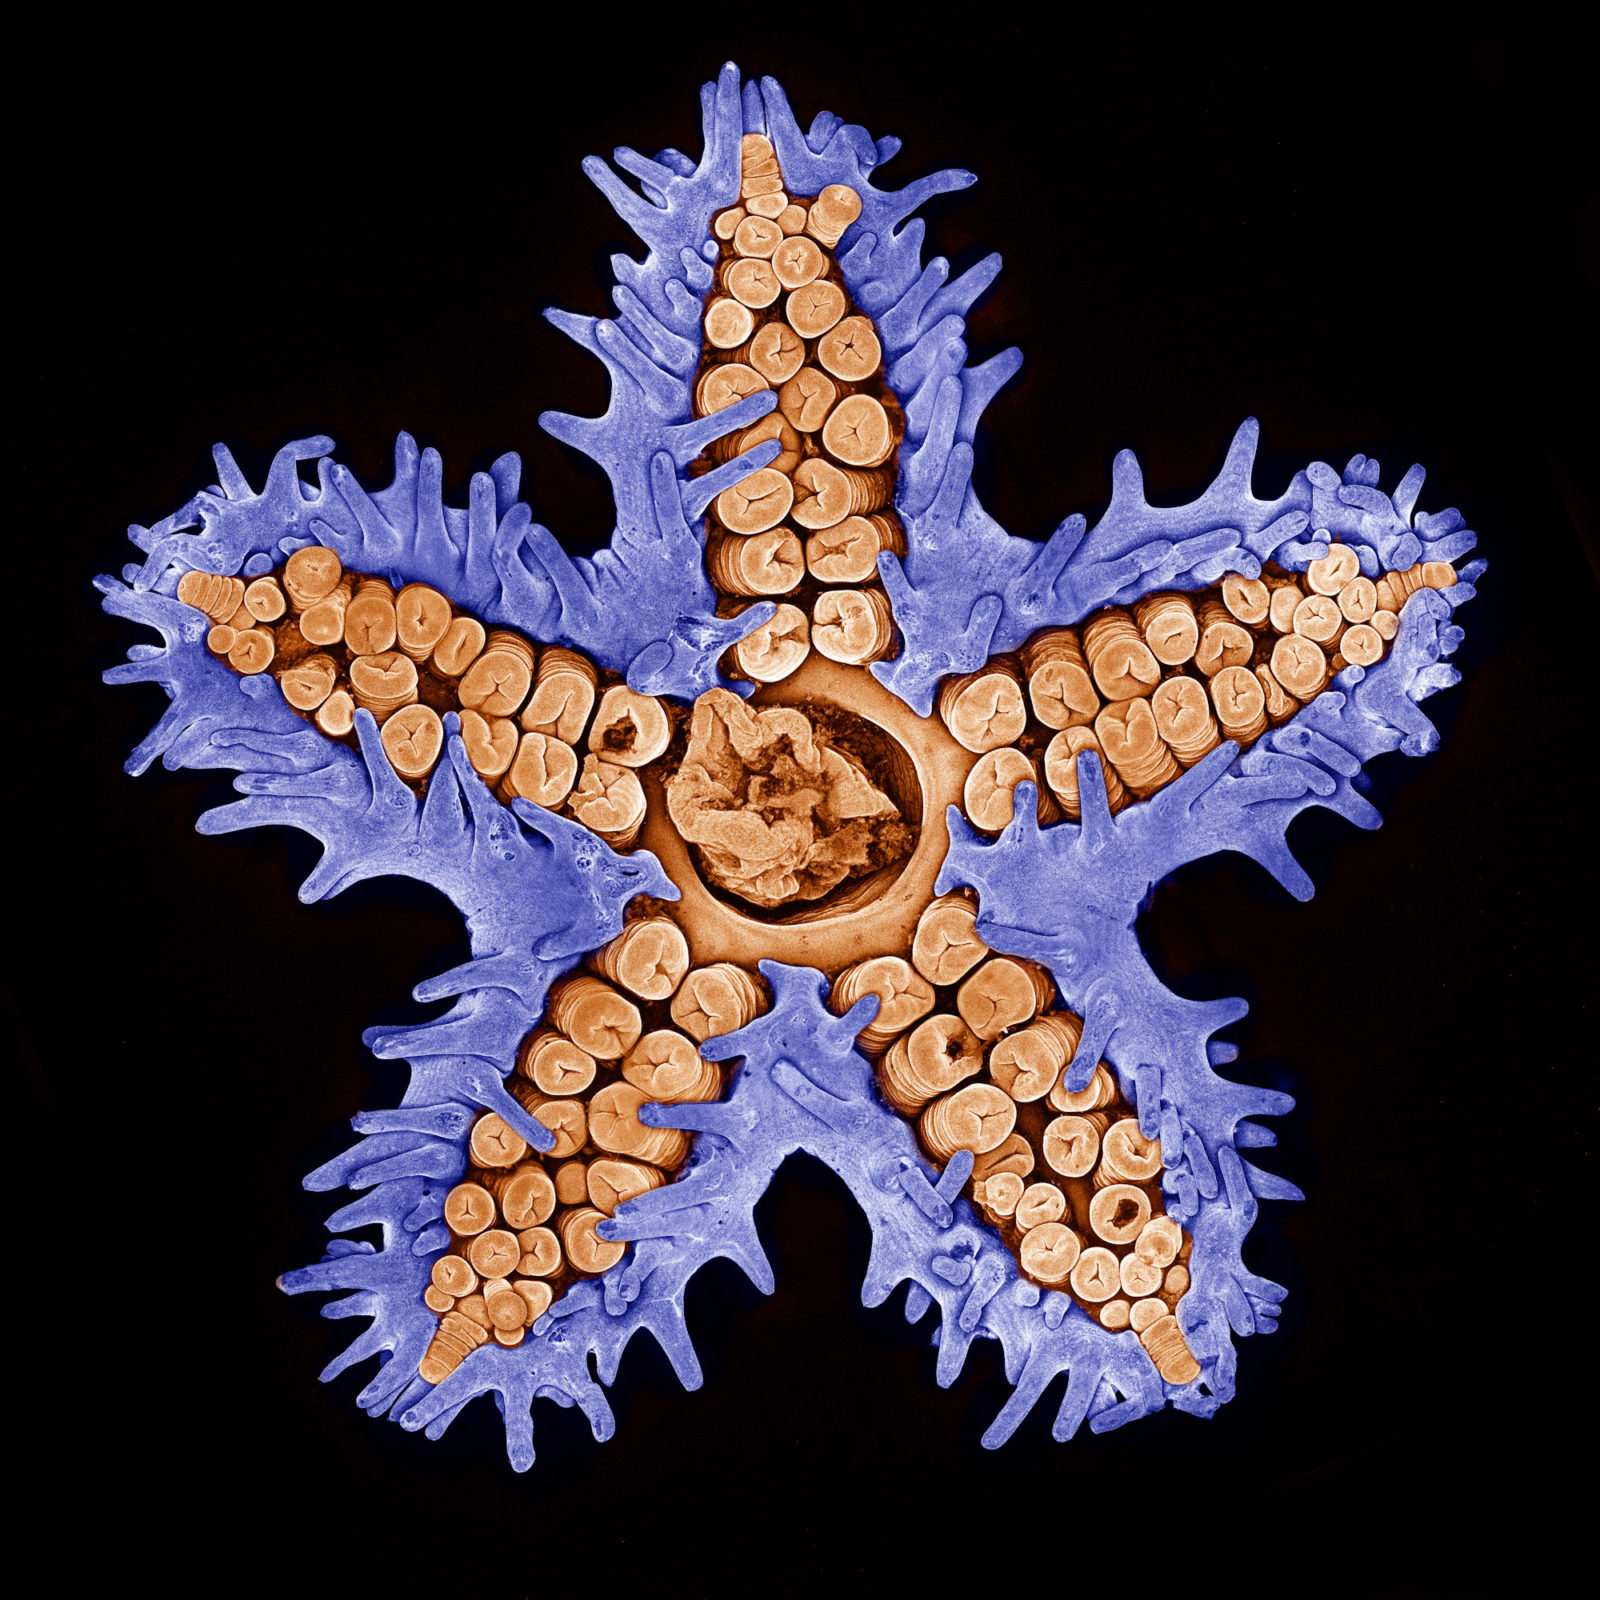 Starfish imaged using confocal microscopy | 2015 Photomicrography Competition